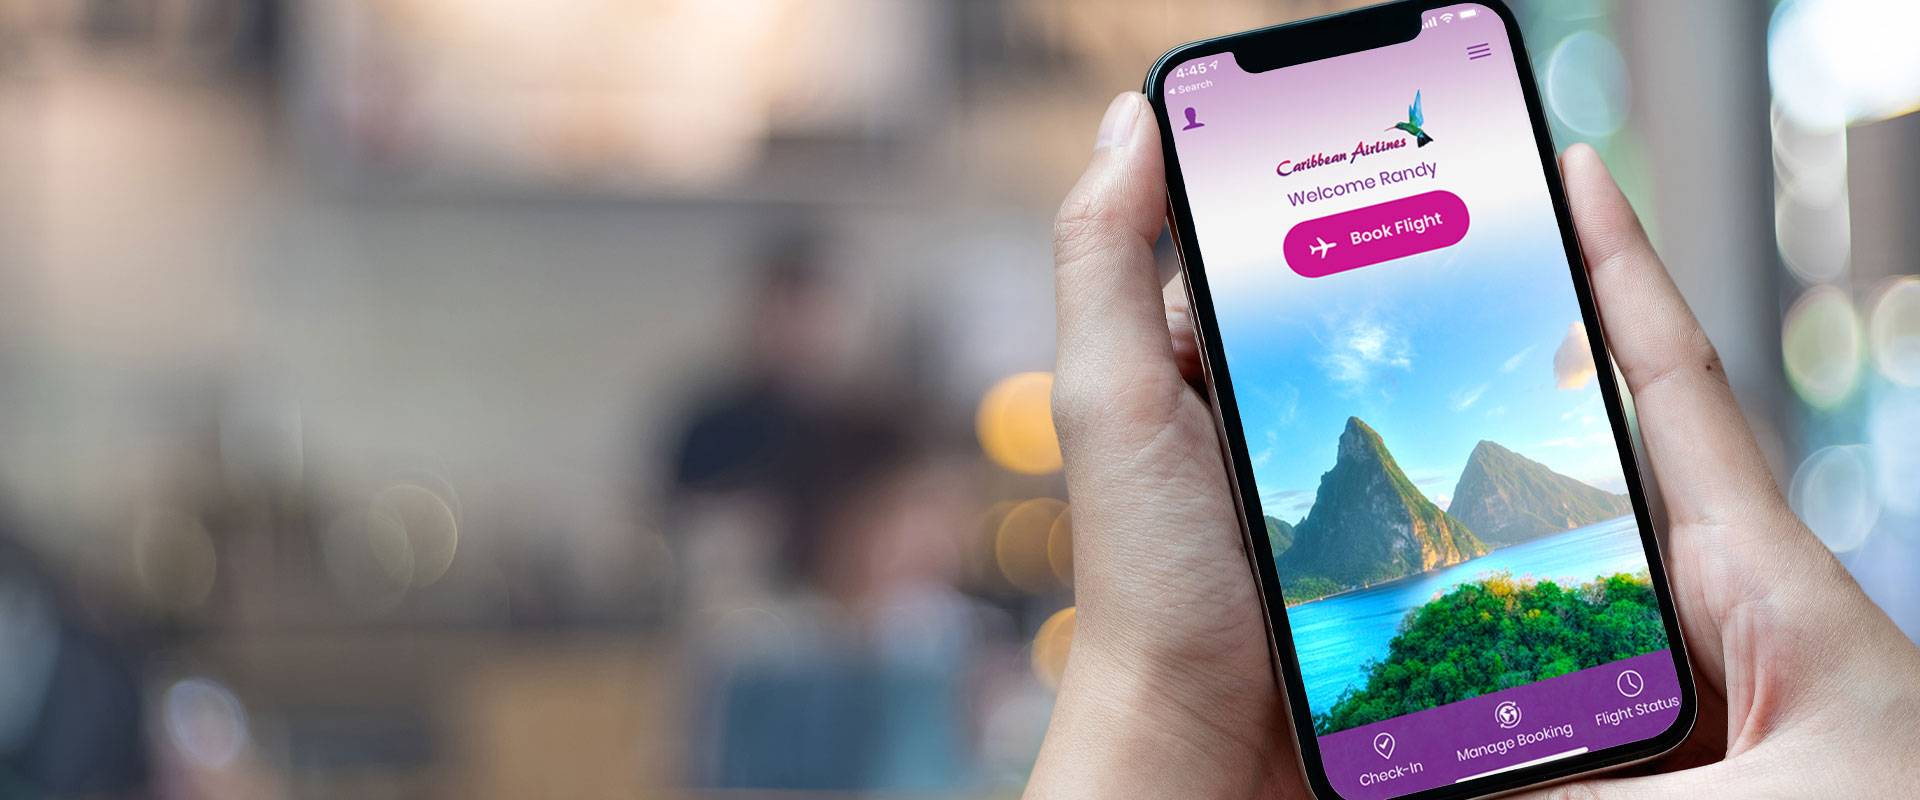 Caribbean Airlines Rolls Out New App